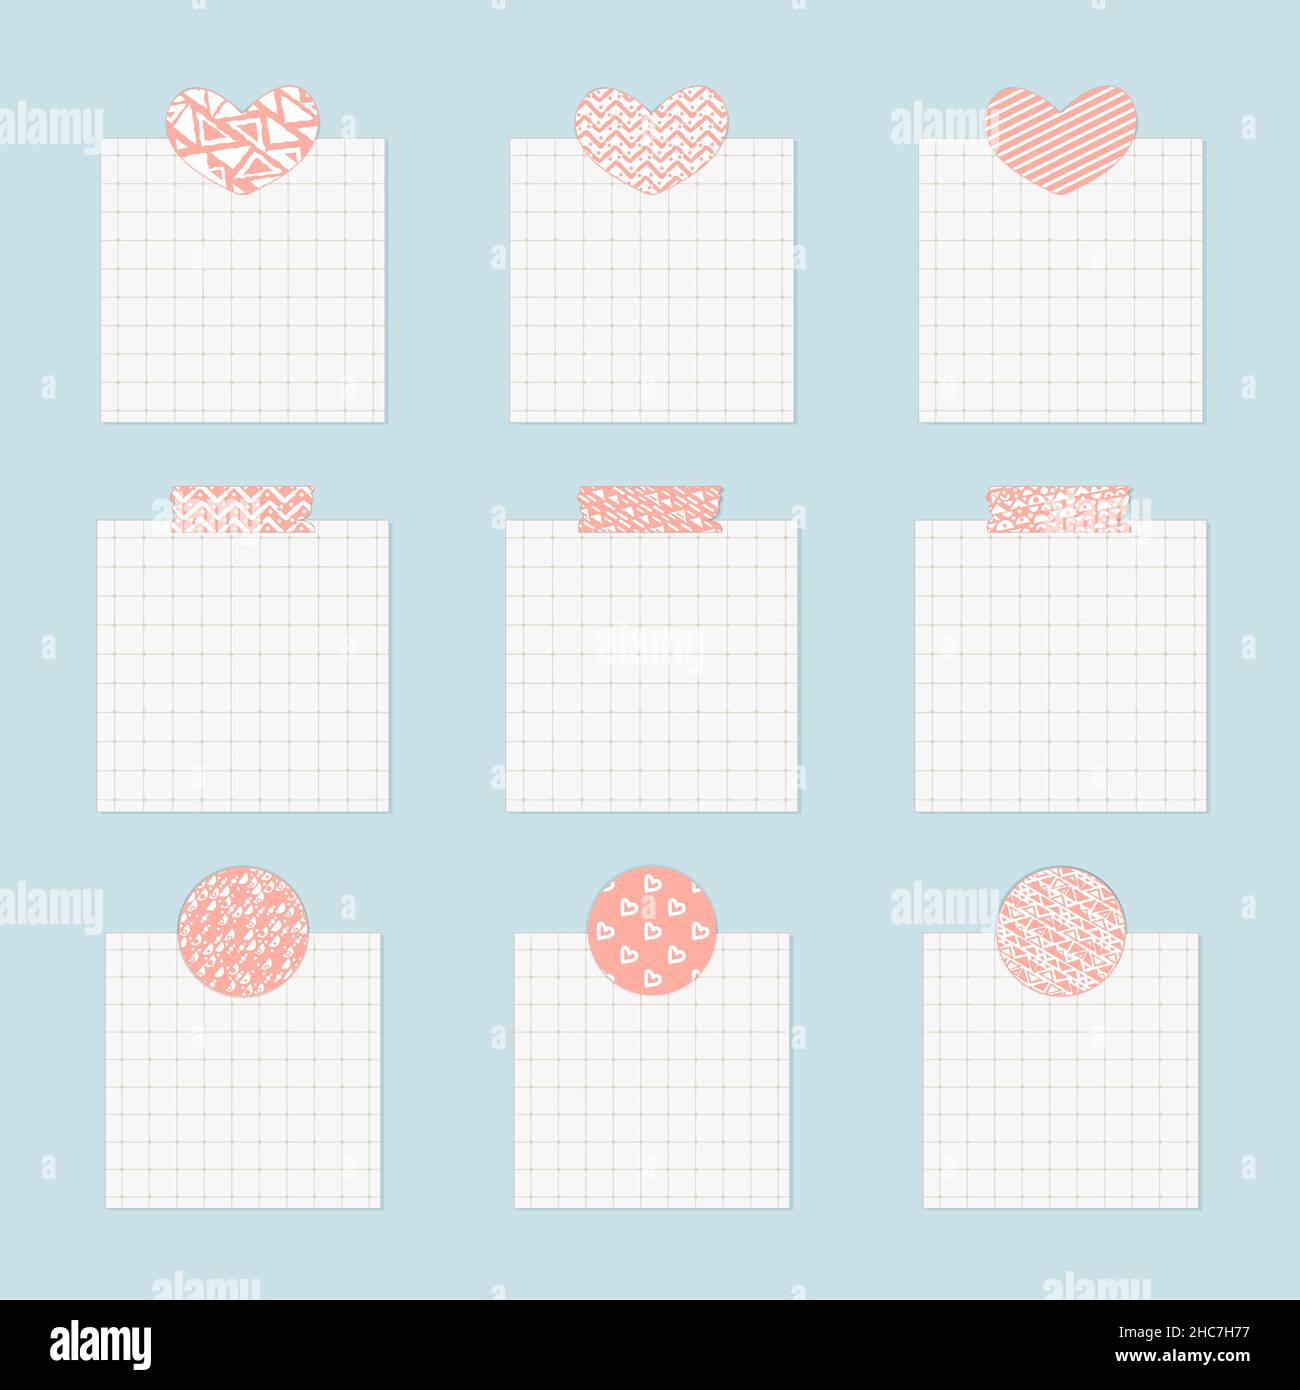 https://c8.alamy.com/comp/2HC7H77/collection-of-squared-sheets-of-grid-note-papers-with-heart-circle-rectangle-push-washi-tape-pin-ready-for-message-note-wish-list-vector-illustra-2HC7H77.jpg